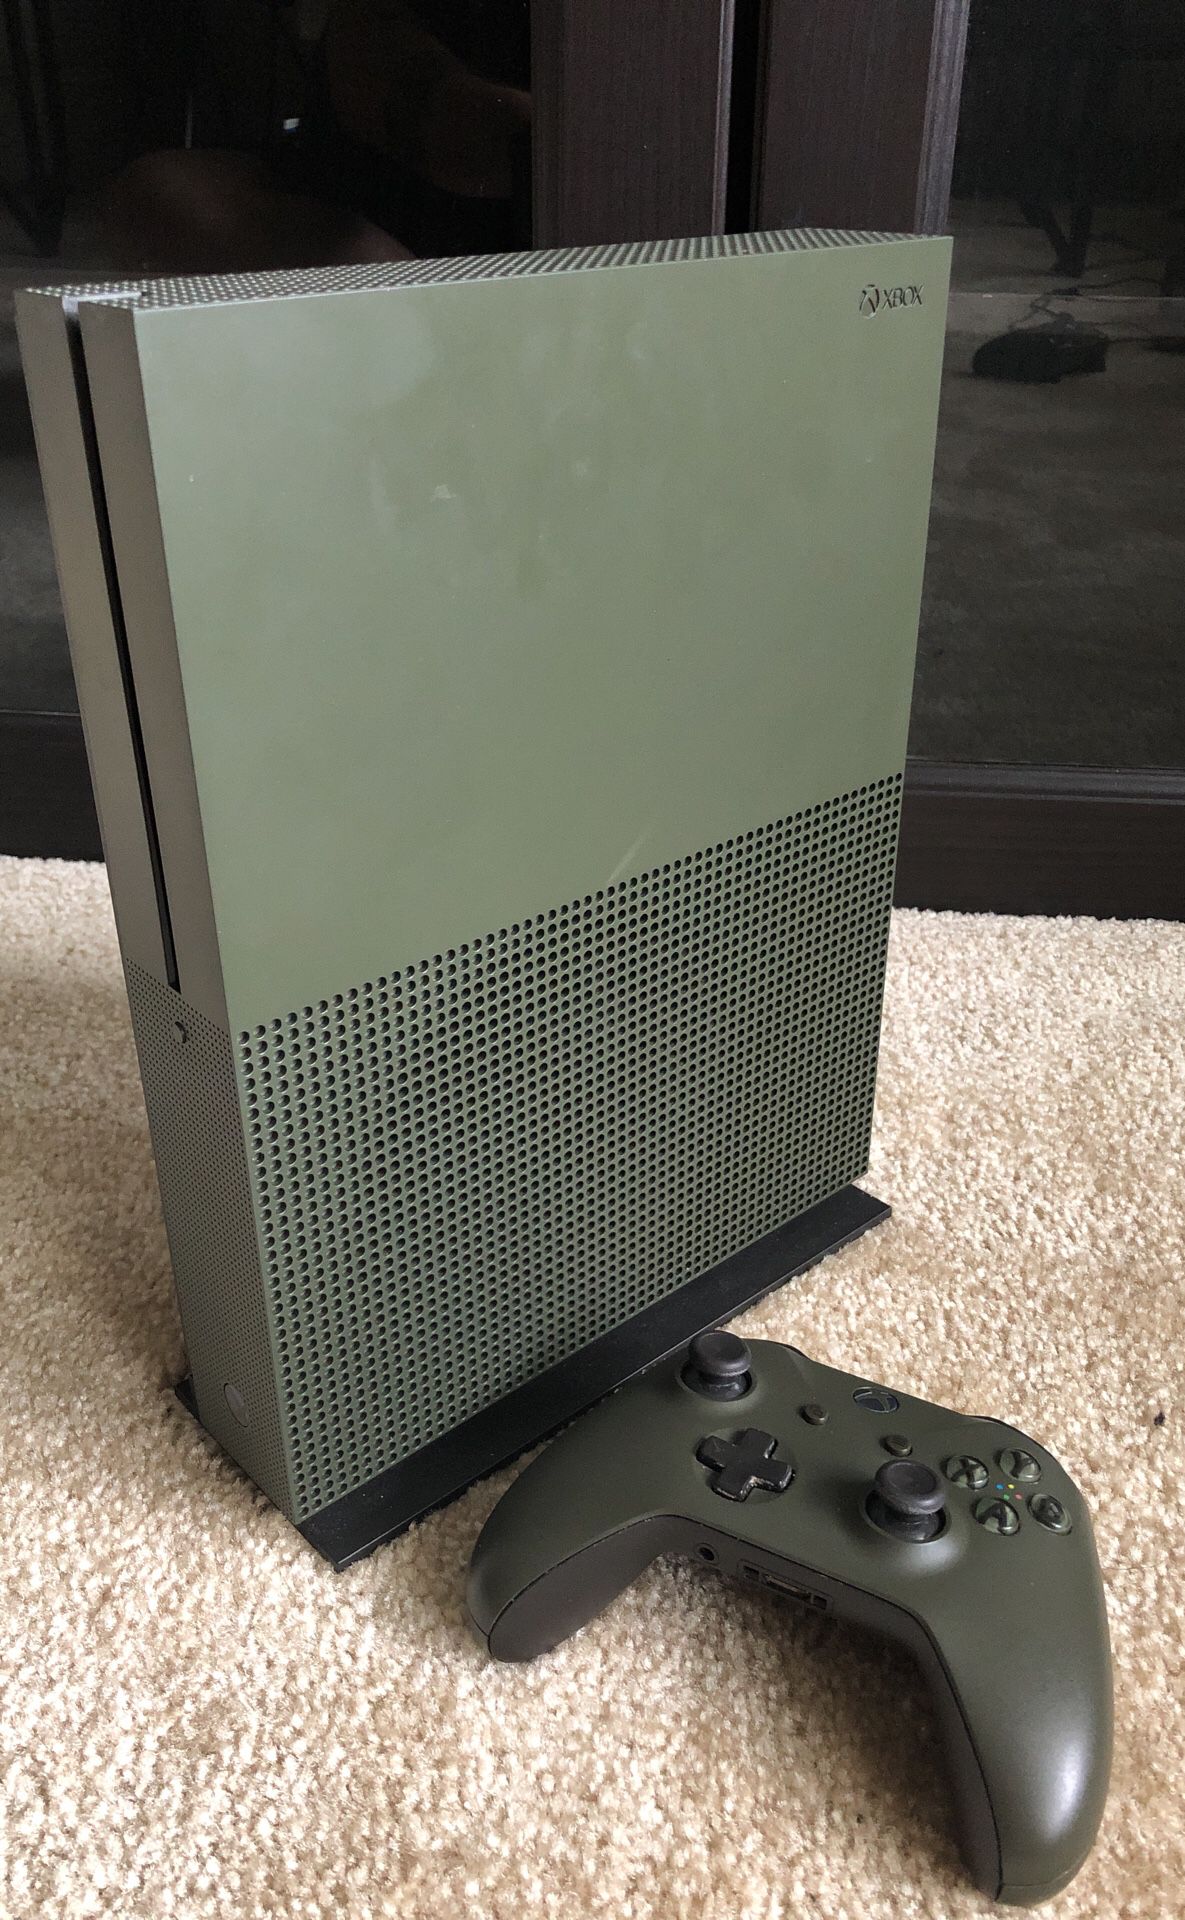 Xbox One S Battlefield 1 Edition mint condition